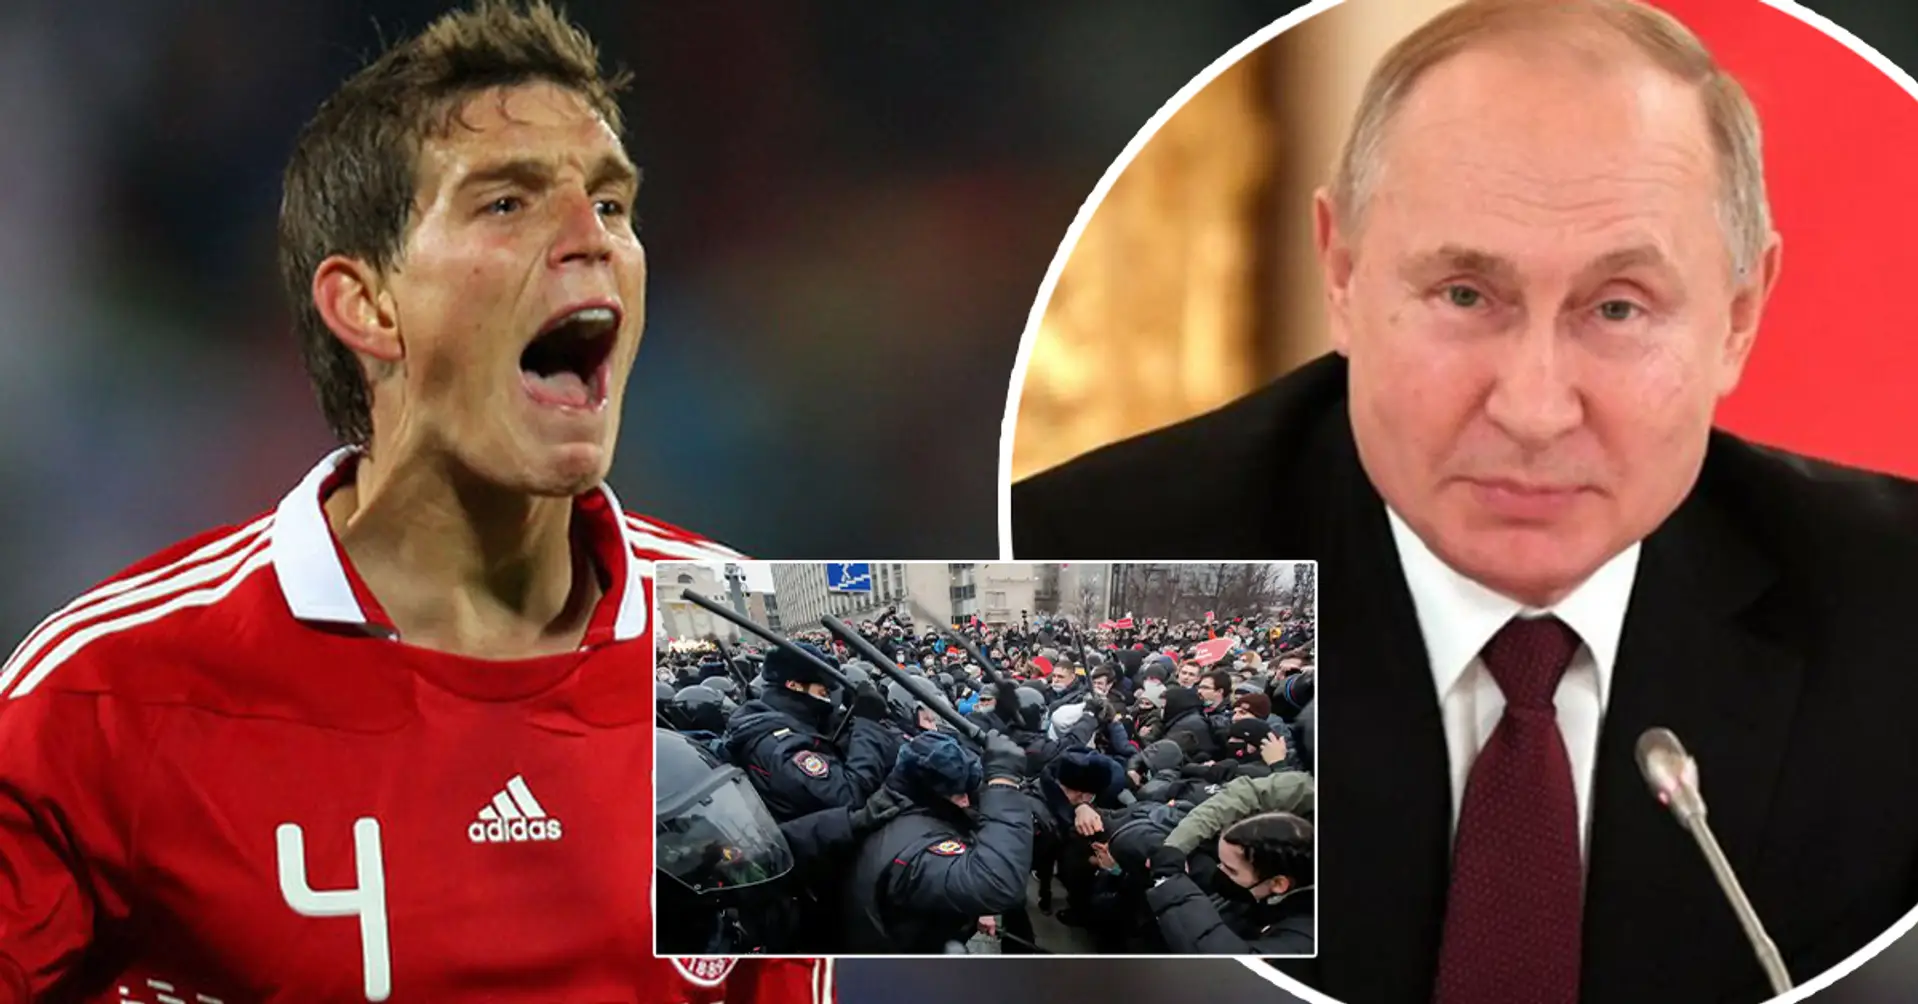 🌍 Global Watch: Homeless man pretends to be ex-Liverpool star Agger, goes to jail in Russia for protesting against Vladimir Putin